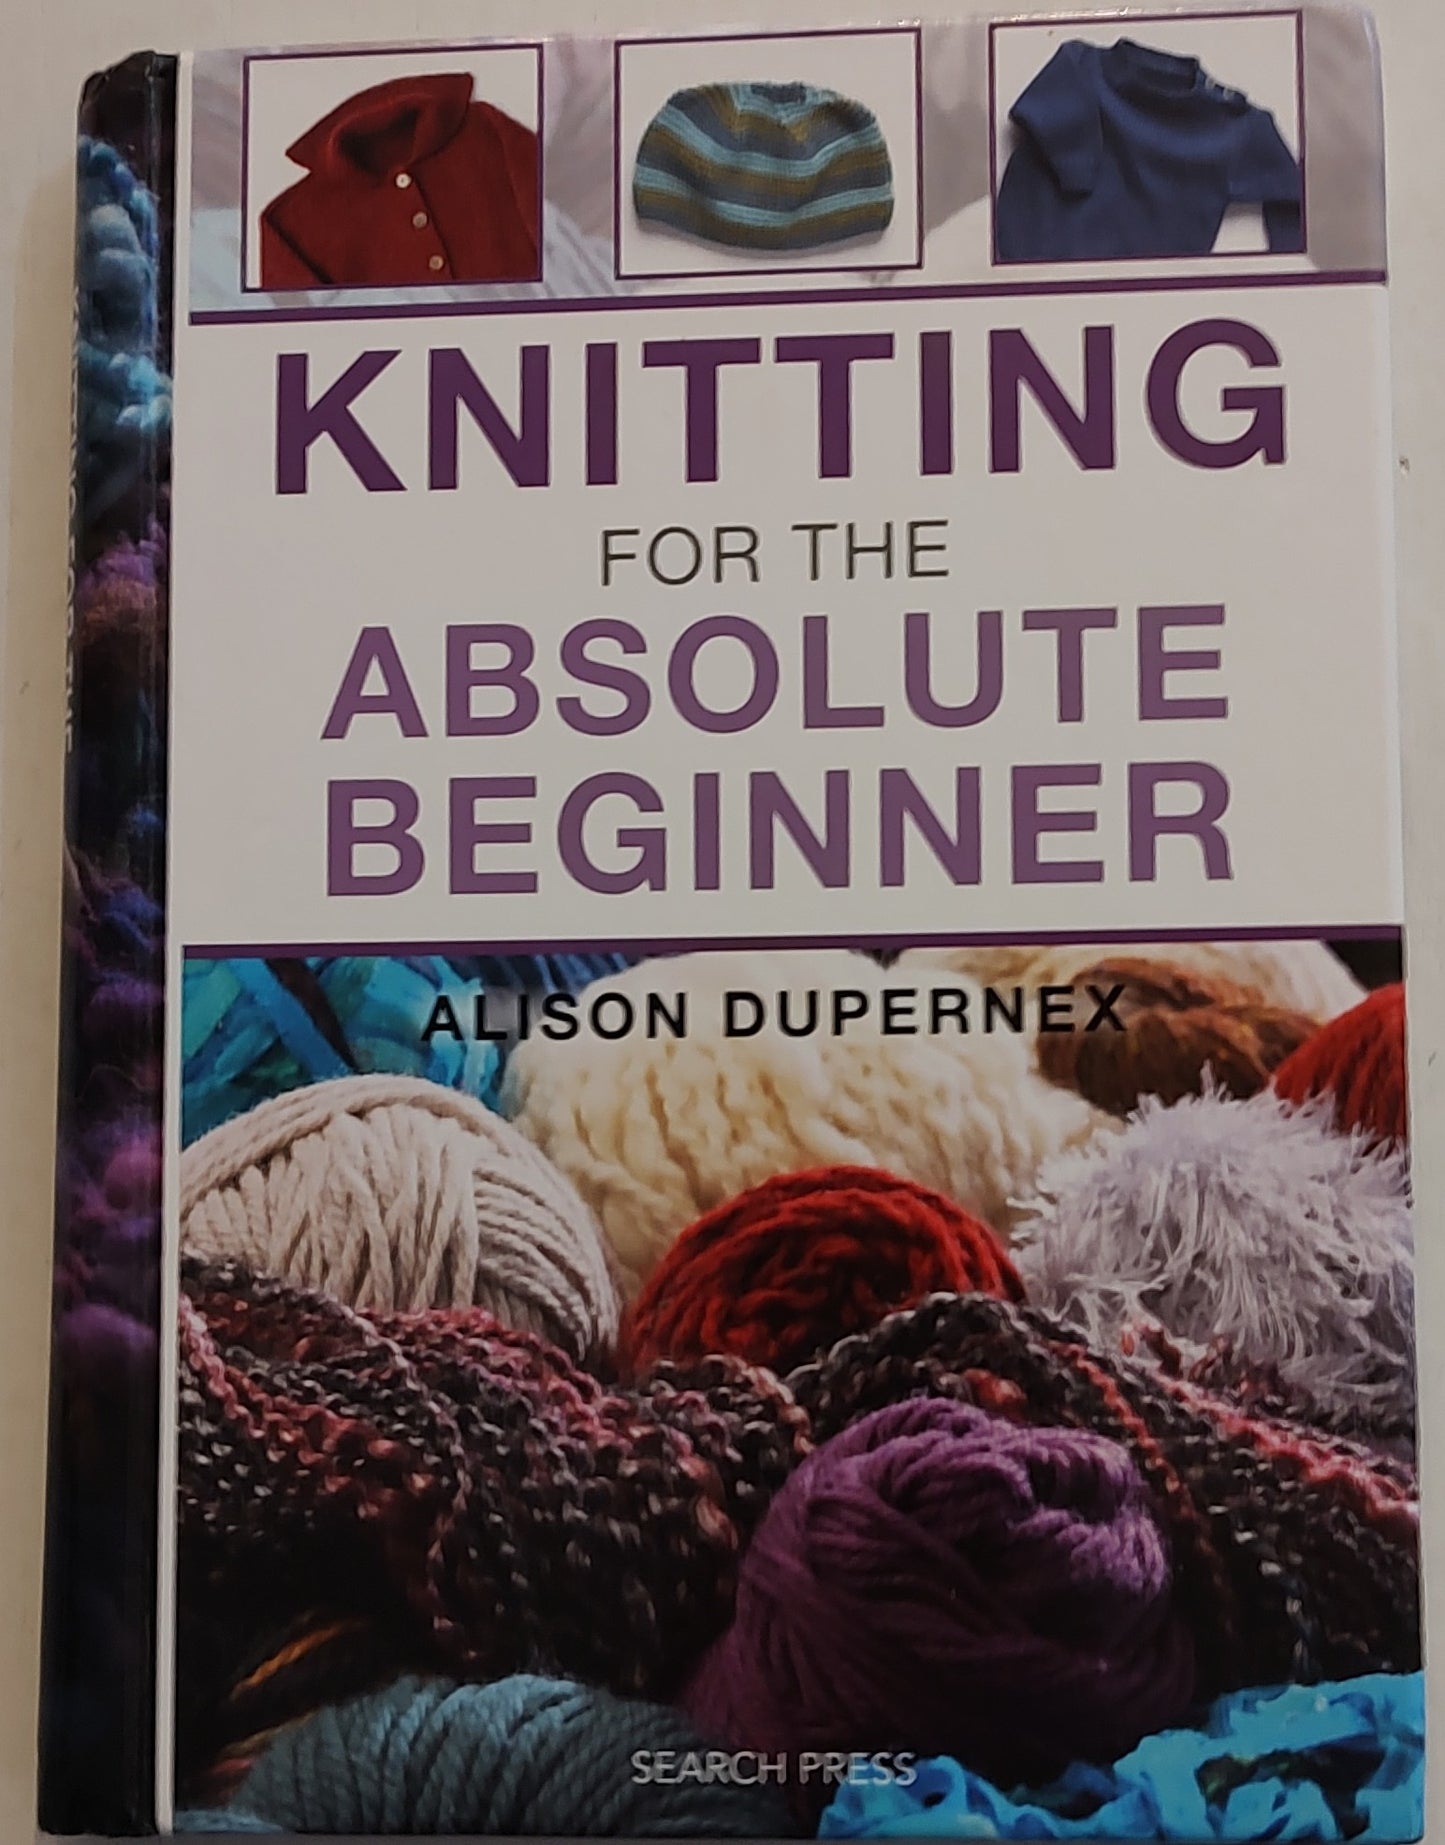 Book - Knitting for the absolute beginner